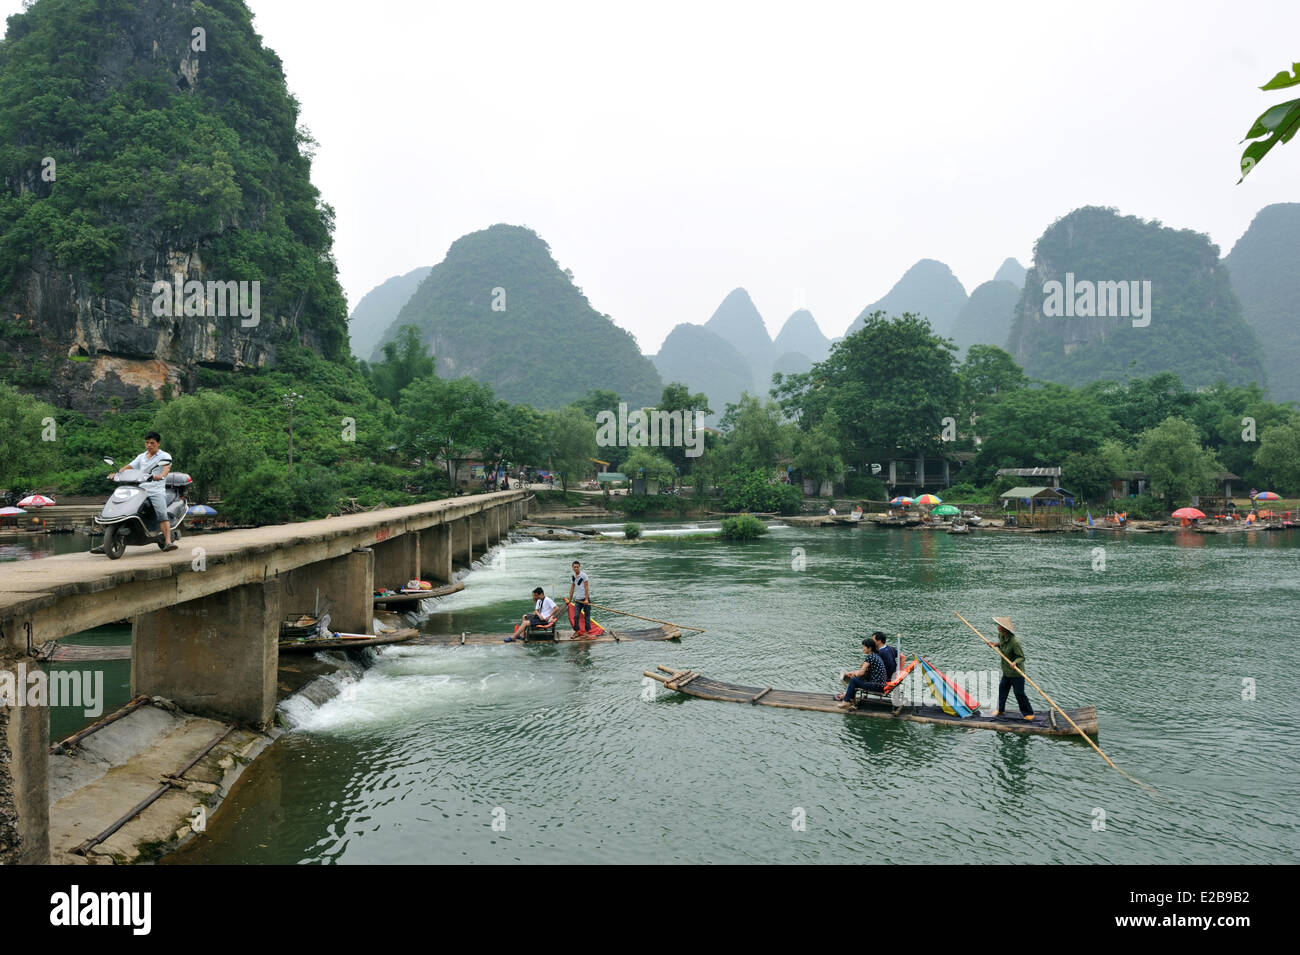 China, Guangxi province, Guilin region, Karst mountain landscape and Yulong River around Yangshuo, Chinese tourist on a raft Stock Photo